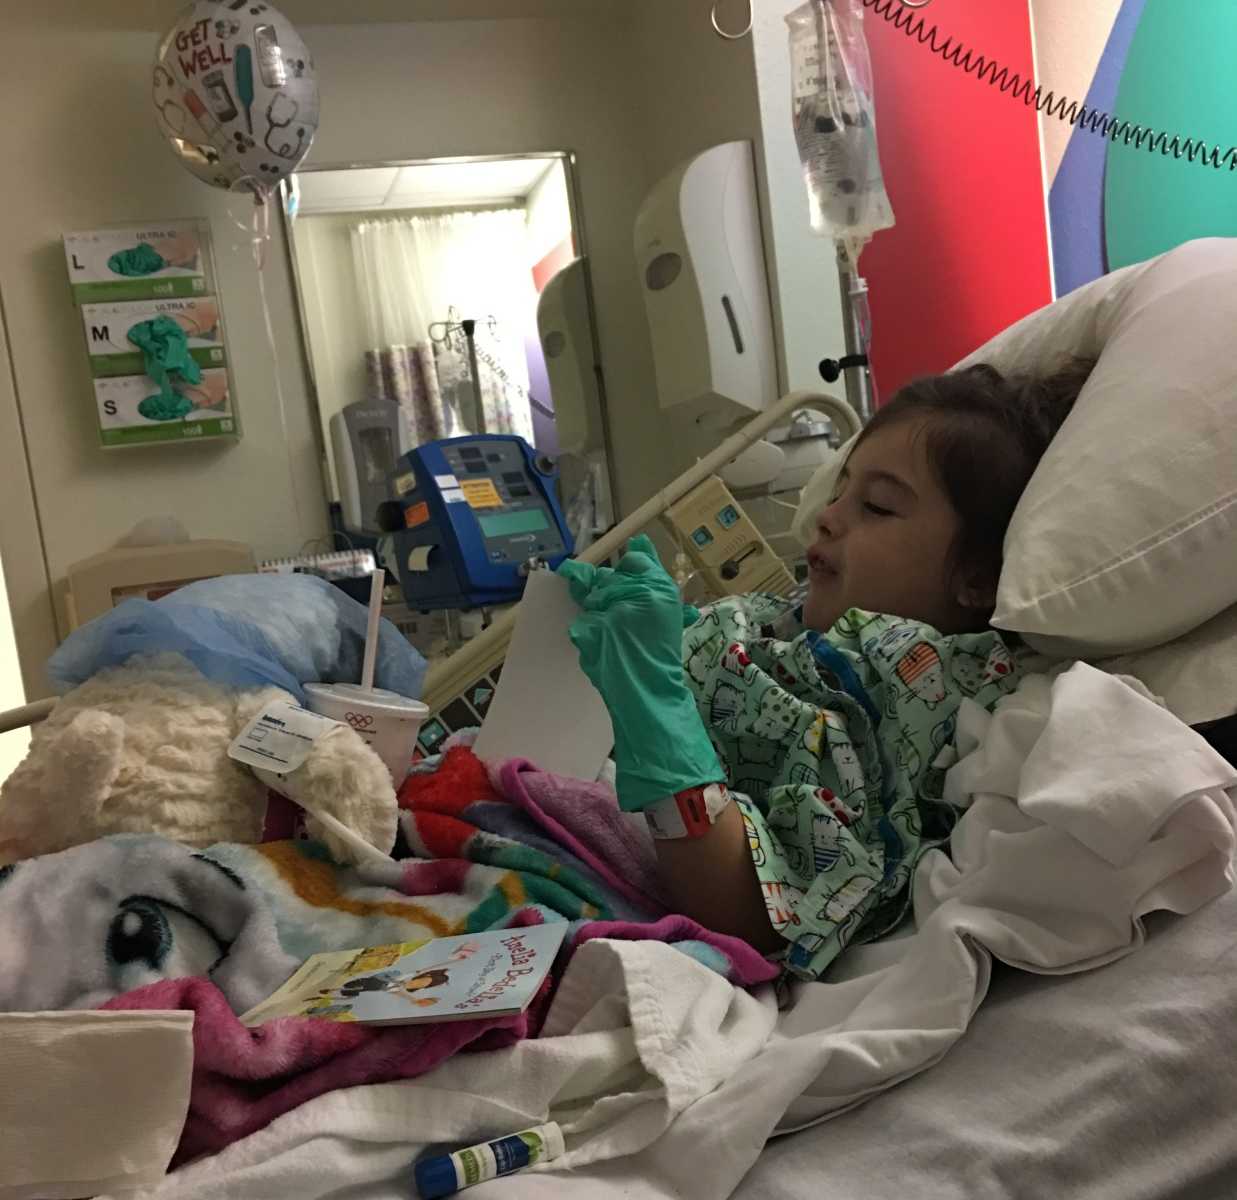 Toddler with rare disease lying in hospital bed with fuzzy blankets, books, and stuffed animals